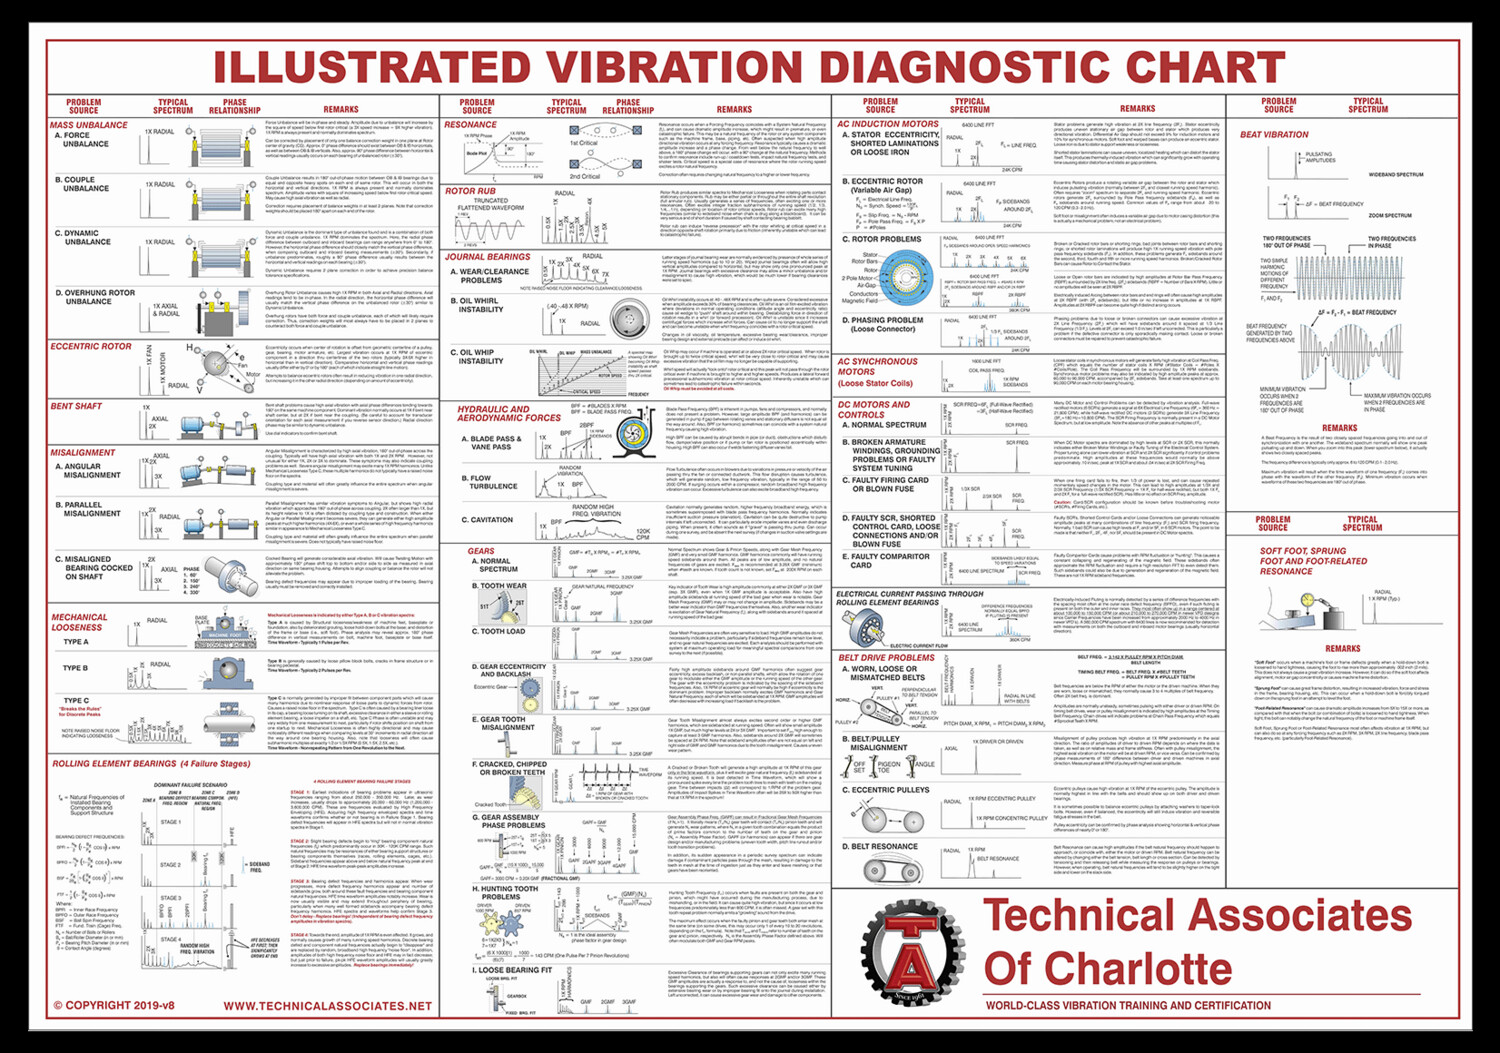 NEW Illustrated Vibration Diagnostic Wall Chart (8th Edition)